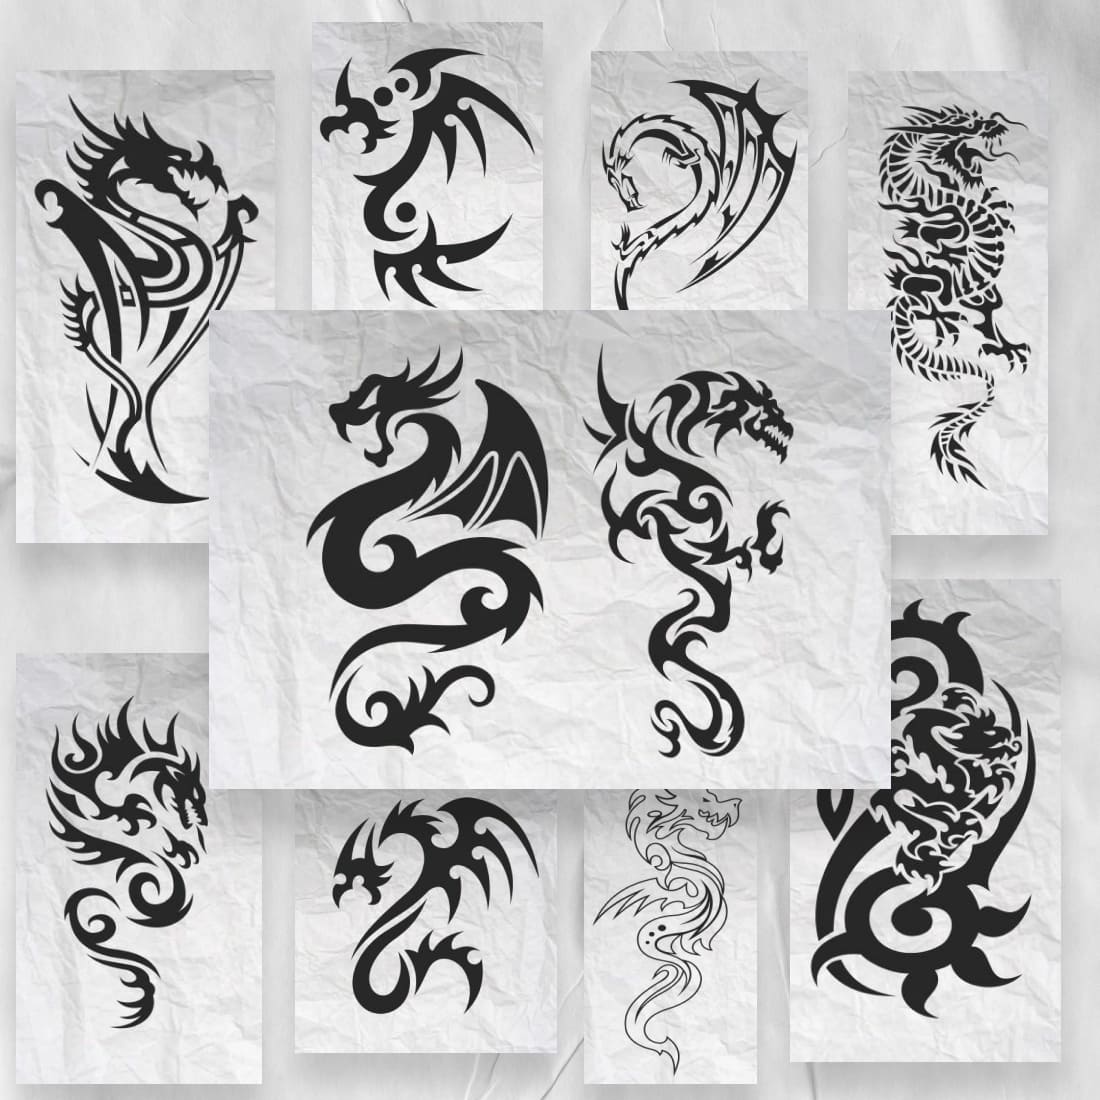 Bunch of different designs on a piece of paper.